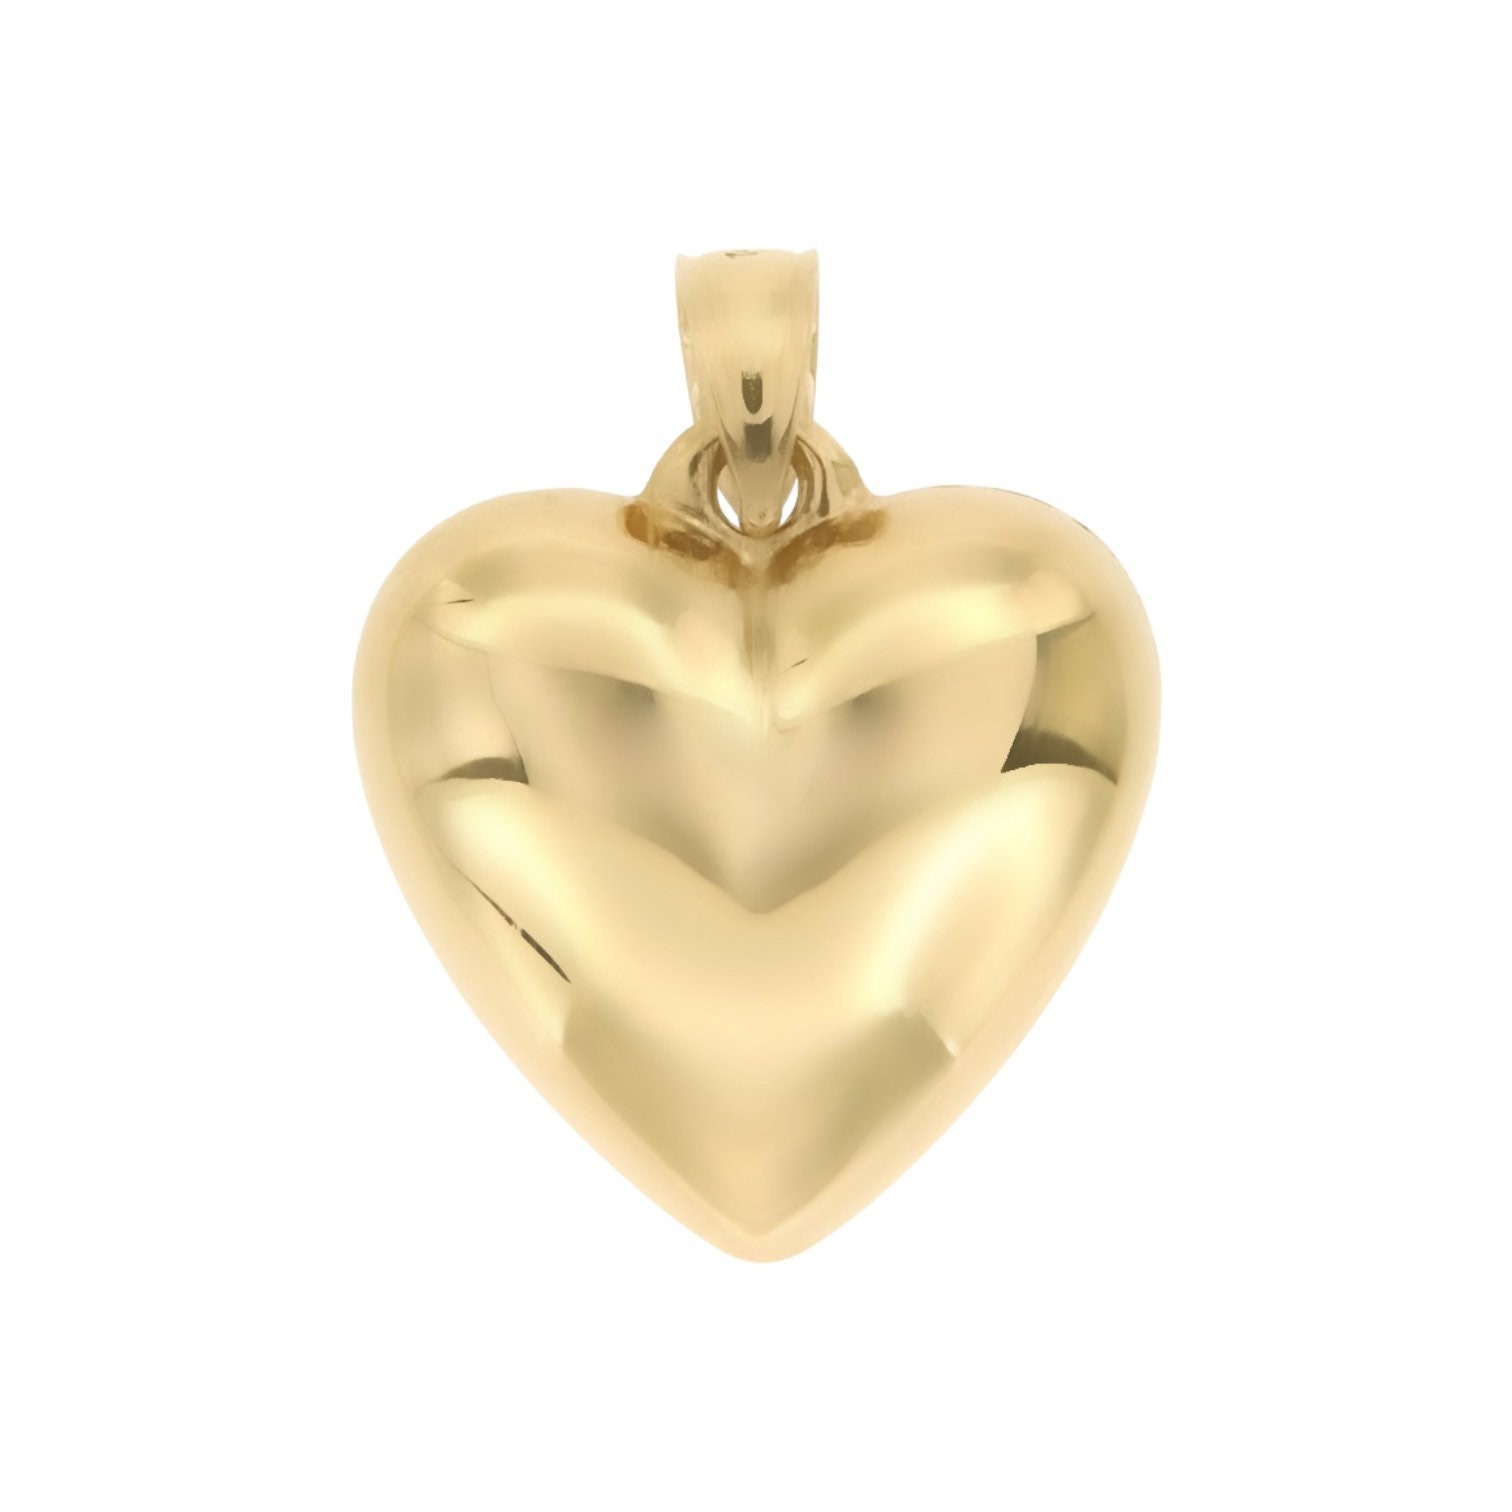 14K Gold Heart Charm / Real Gold Heart Pendant / Puffy Heart Charm, Valentine's Gift for Her